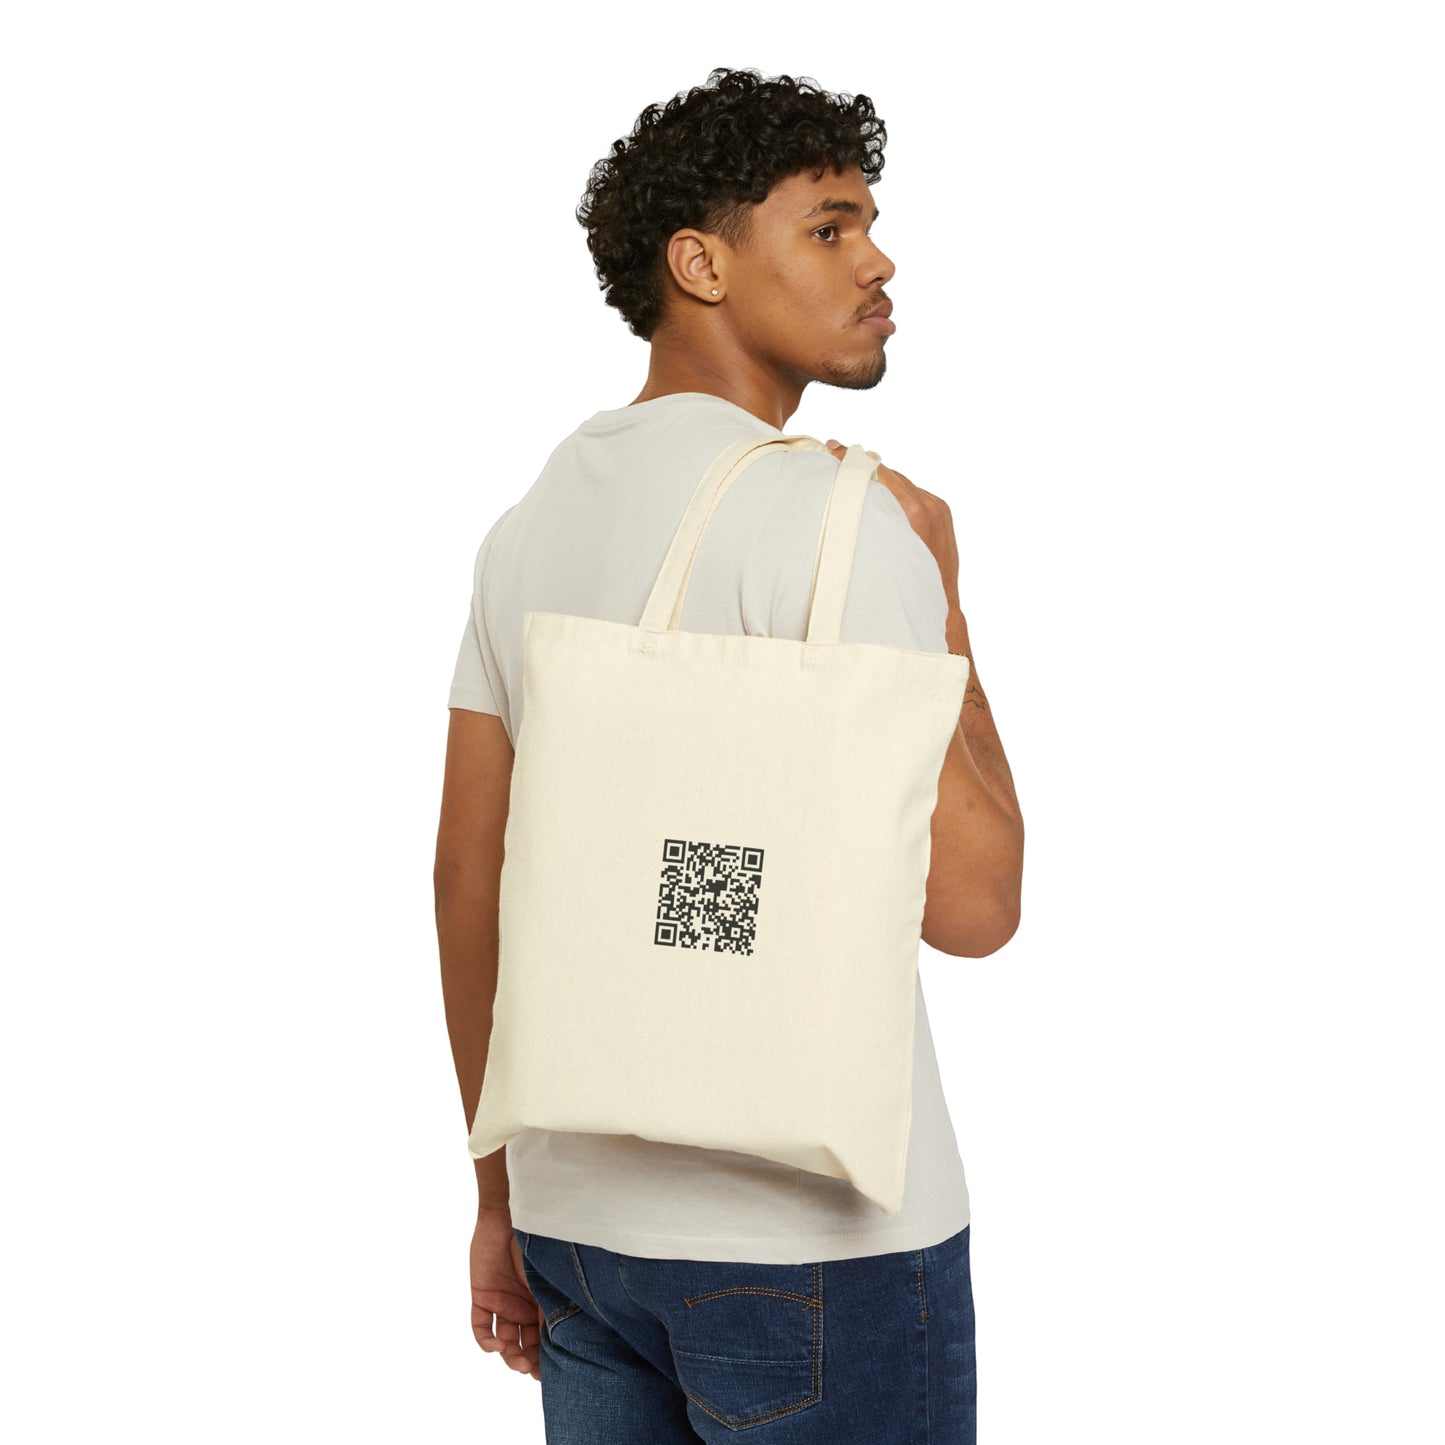 Time Wasters - Cotton Canvas Tote Bag